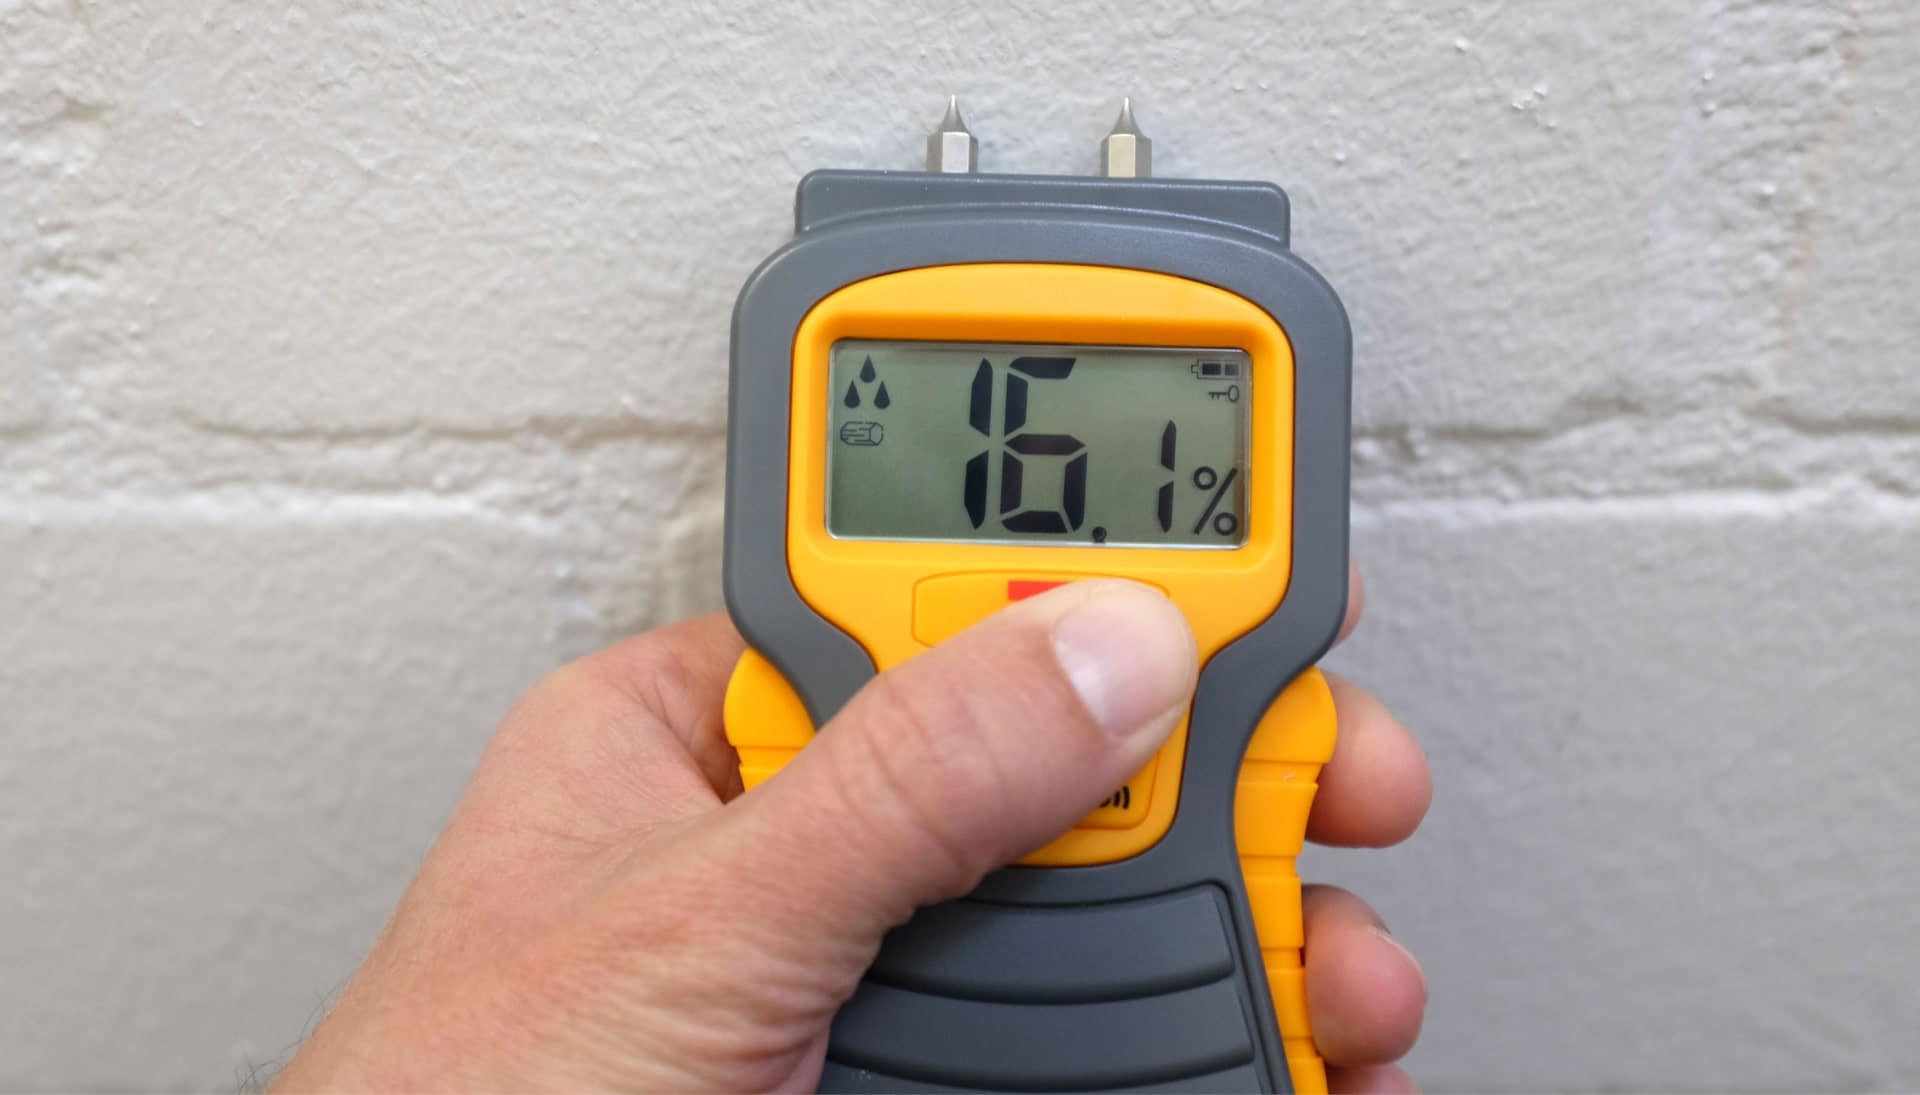 We provide fast, accurate, and affordable mold testing services in Columbia, South Carolina.